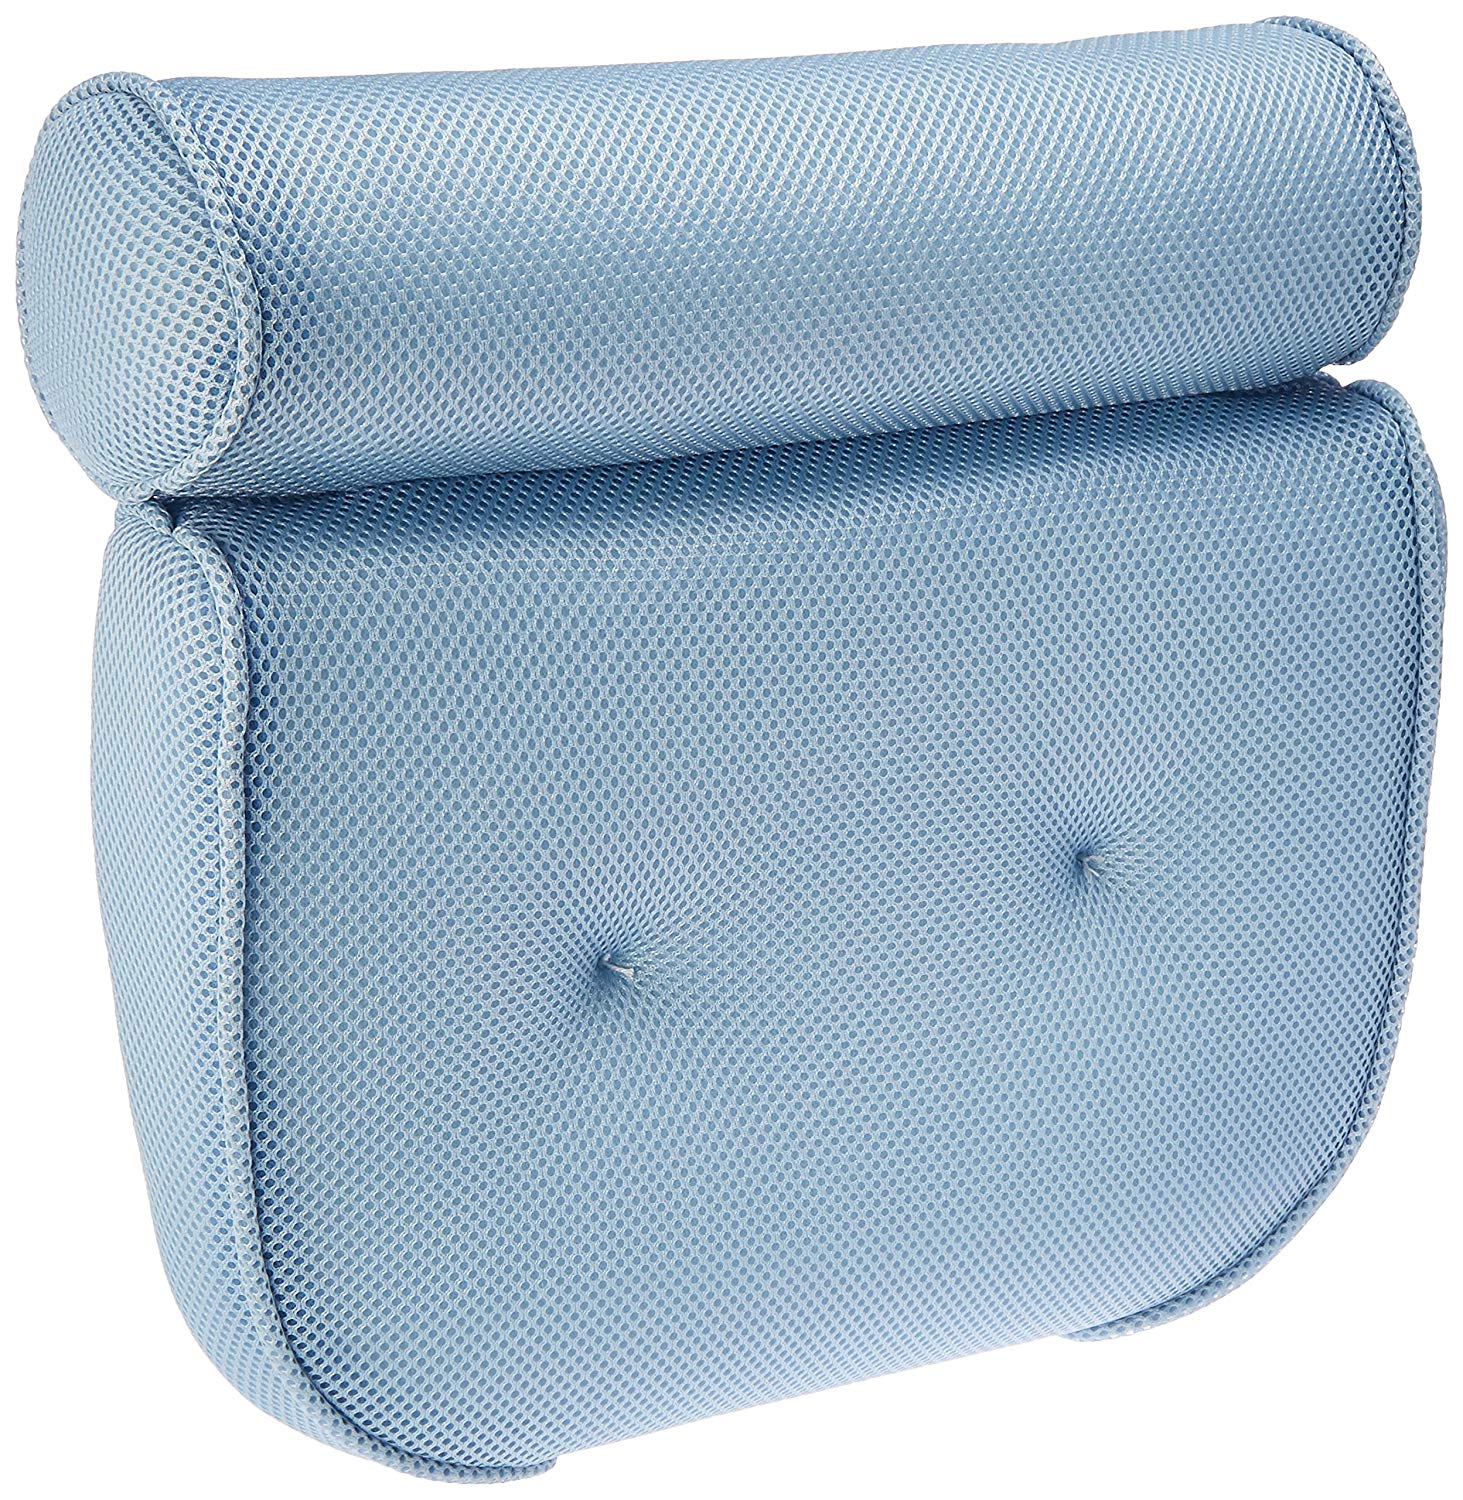 Jobar International-  Home Spa Bath Pillow - Jacuzzi Bath Pillow With Back And Neck Support.